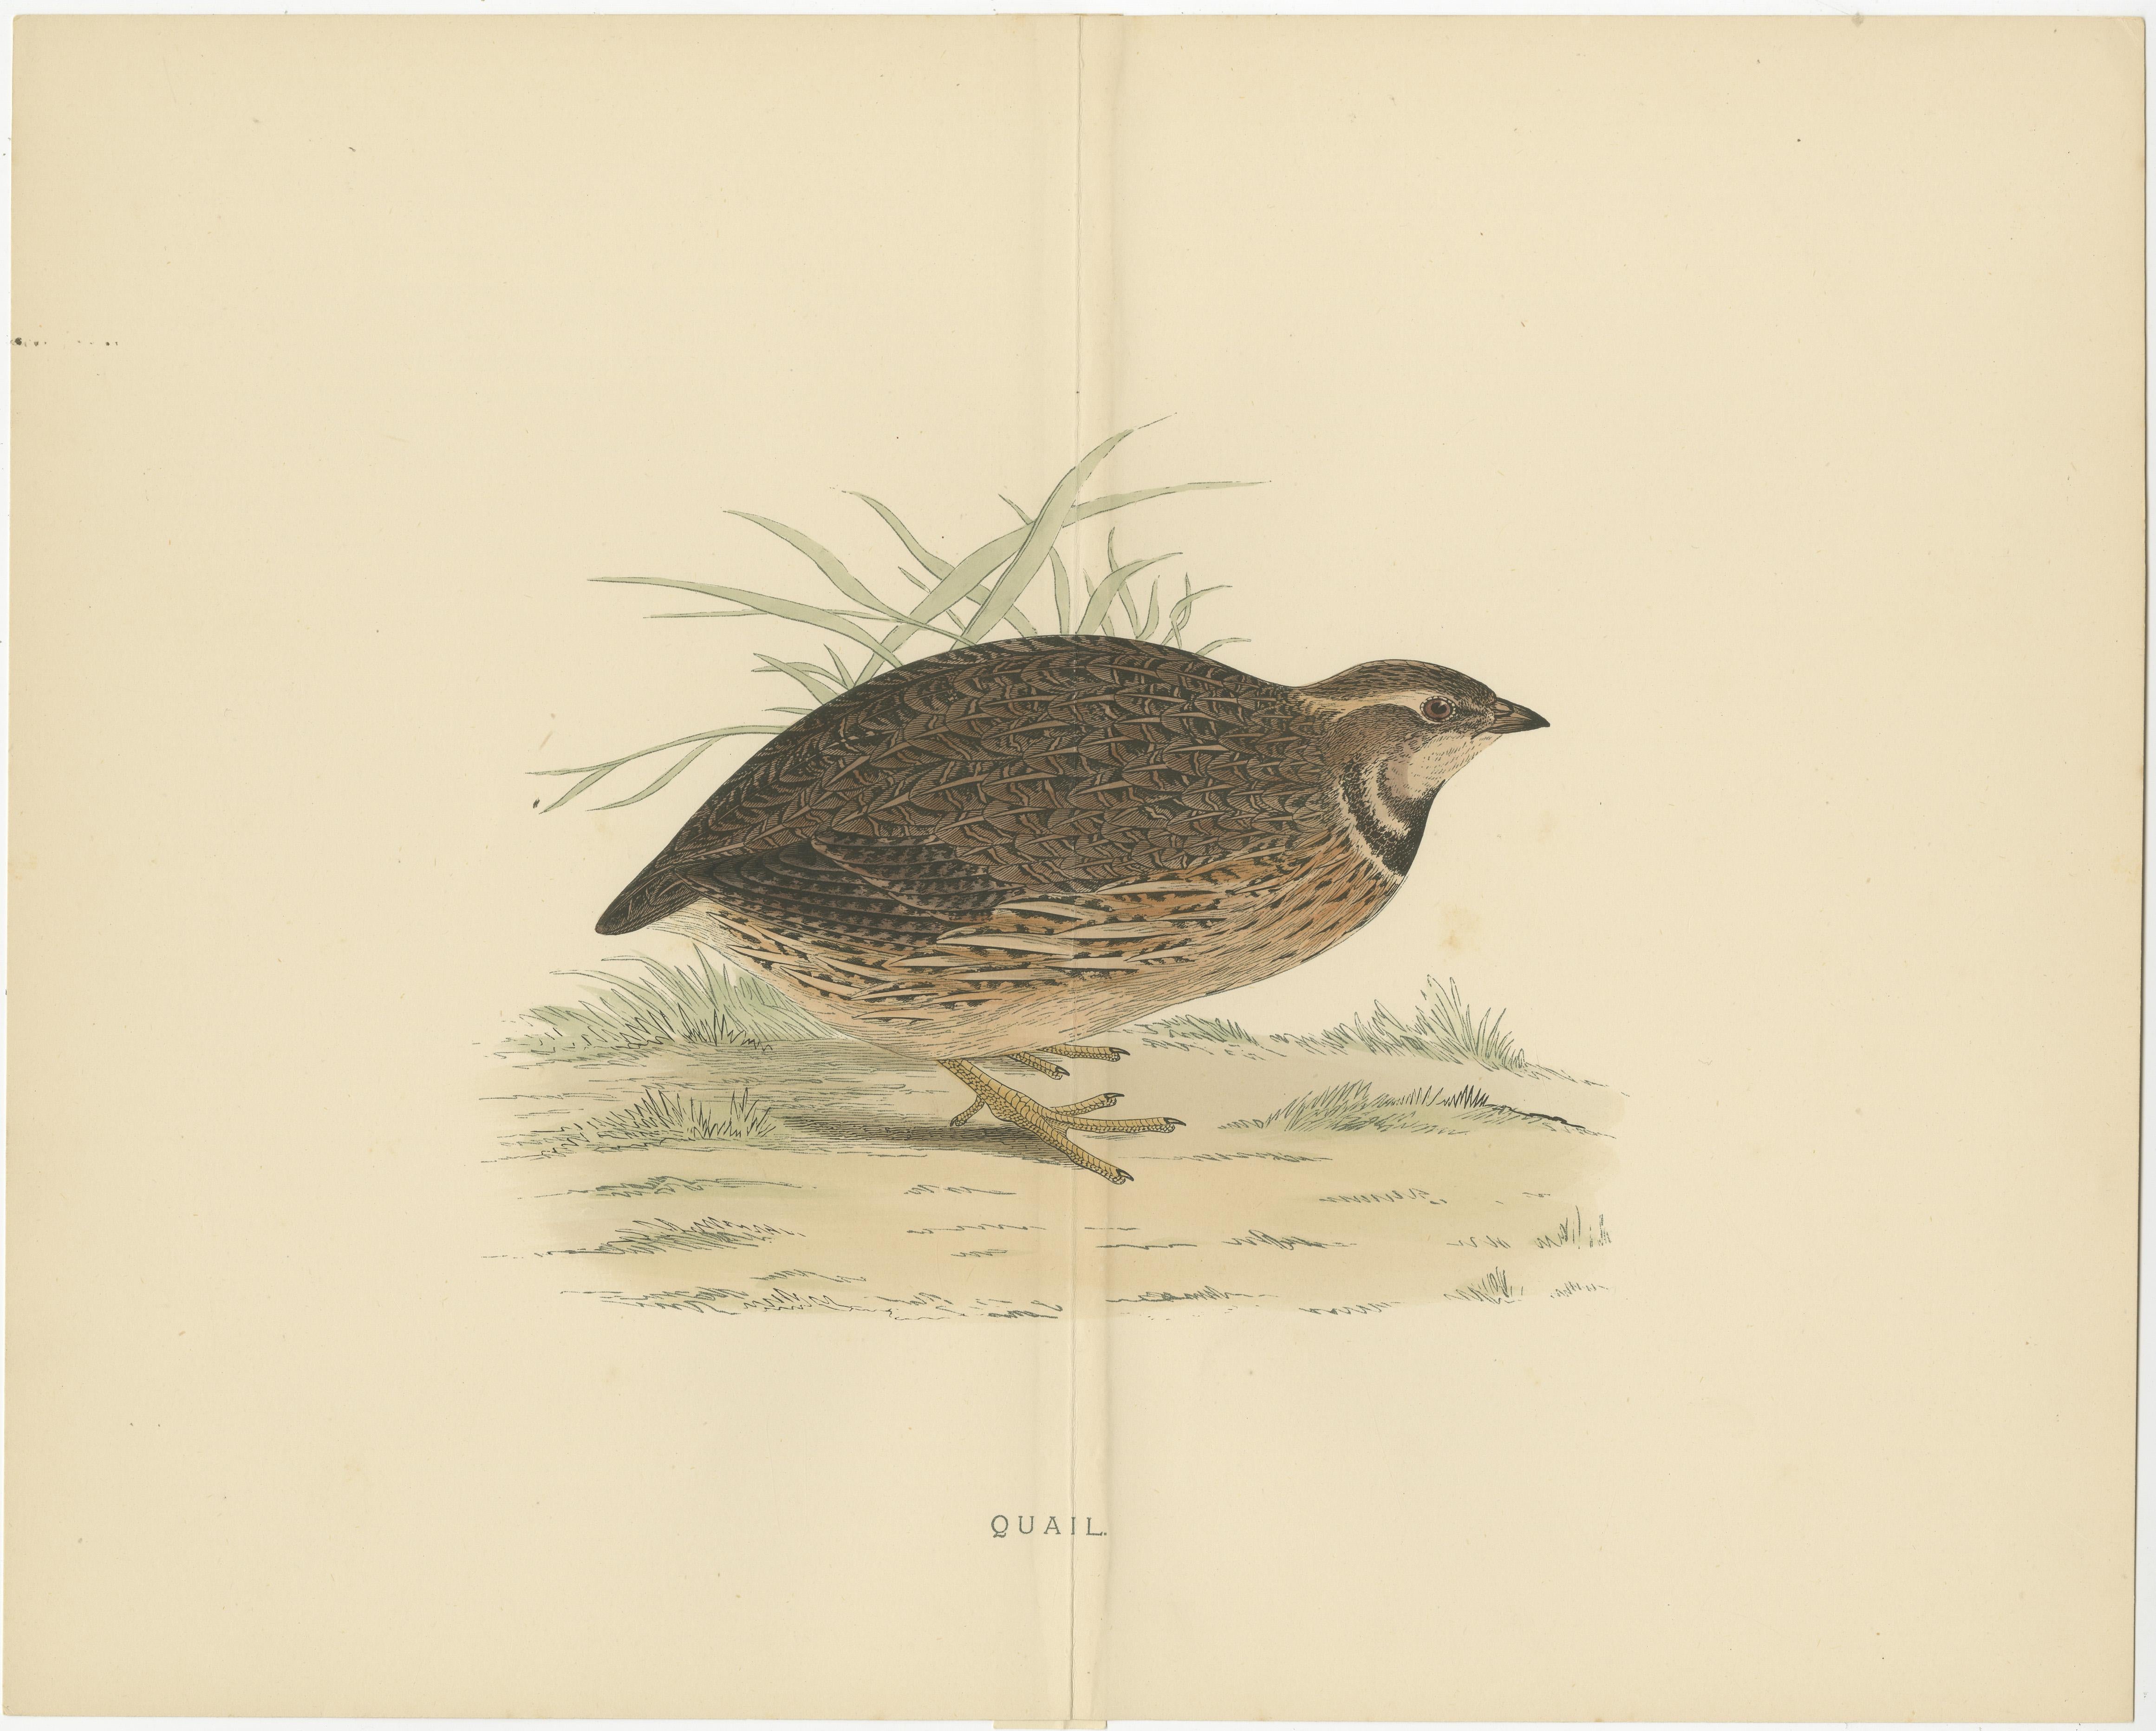 Antique print titled 'Quail'. Original old bird print of a quail. This print originates from 'British Game Birds and Wildfowl' by Beverly Robinson Morris. Published circa 1895.